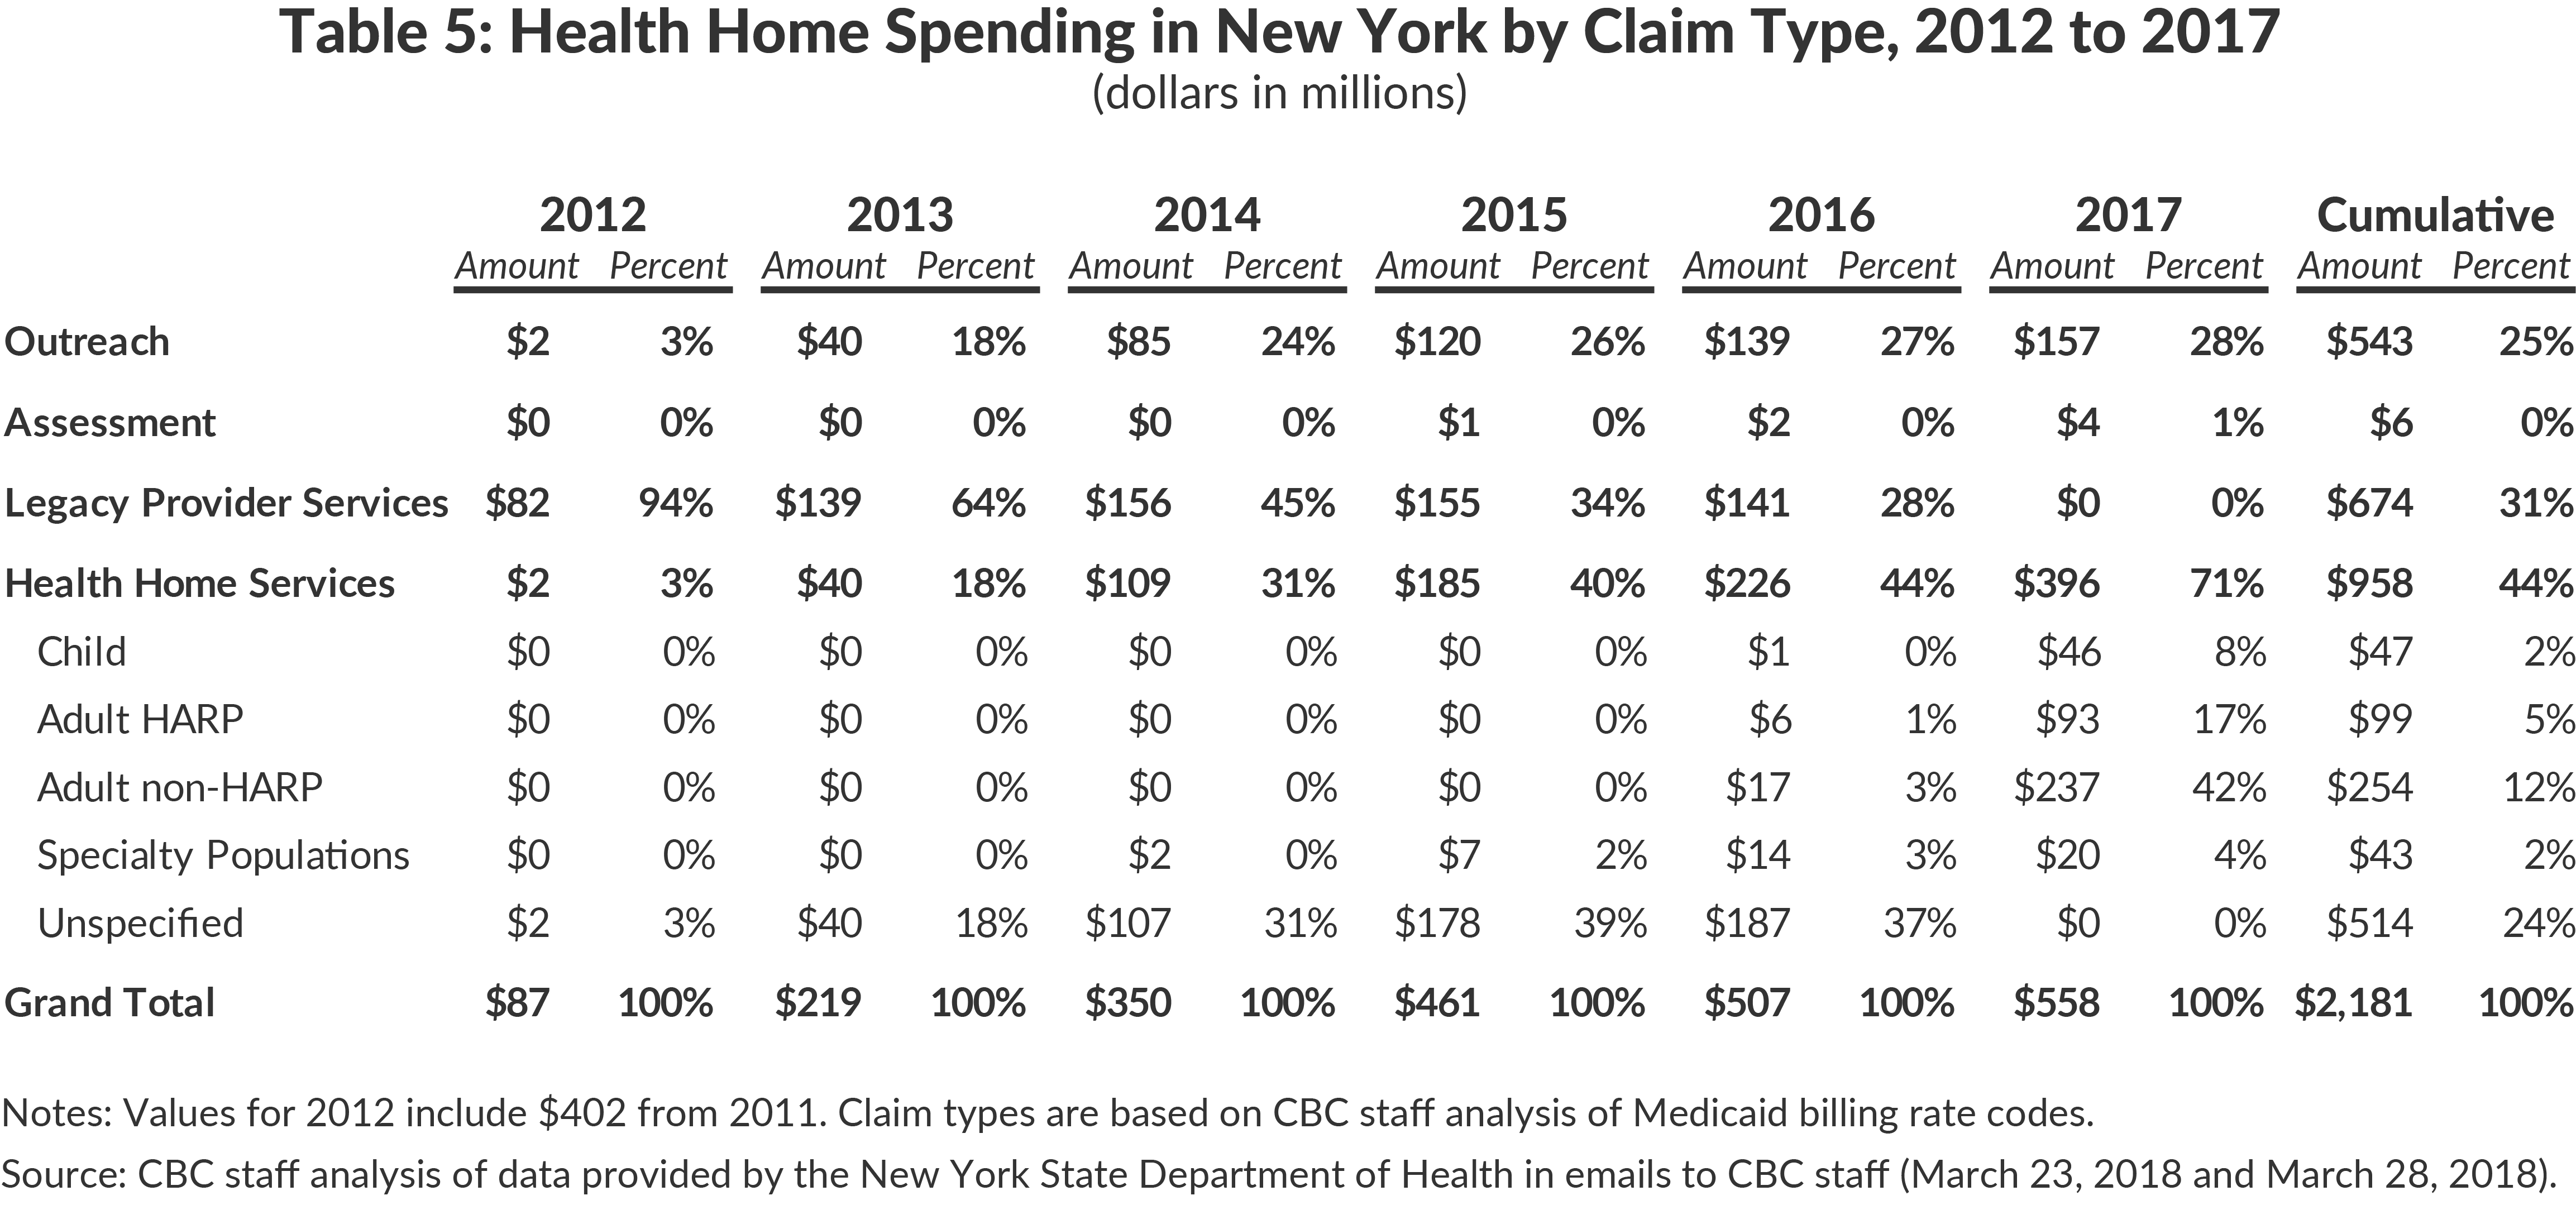 Table 5: Health Home Spending in New York by Claim Type, 2012 to 2017